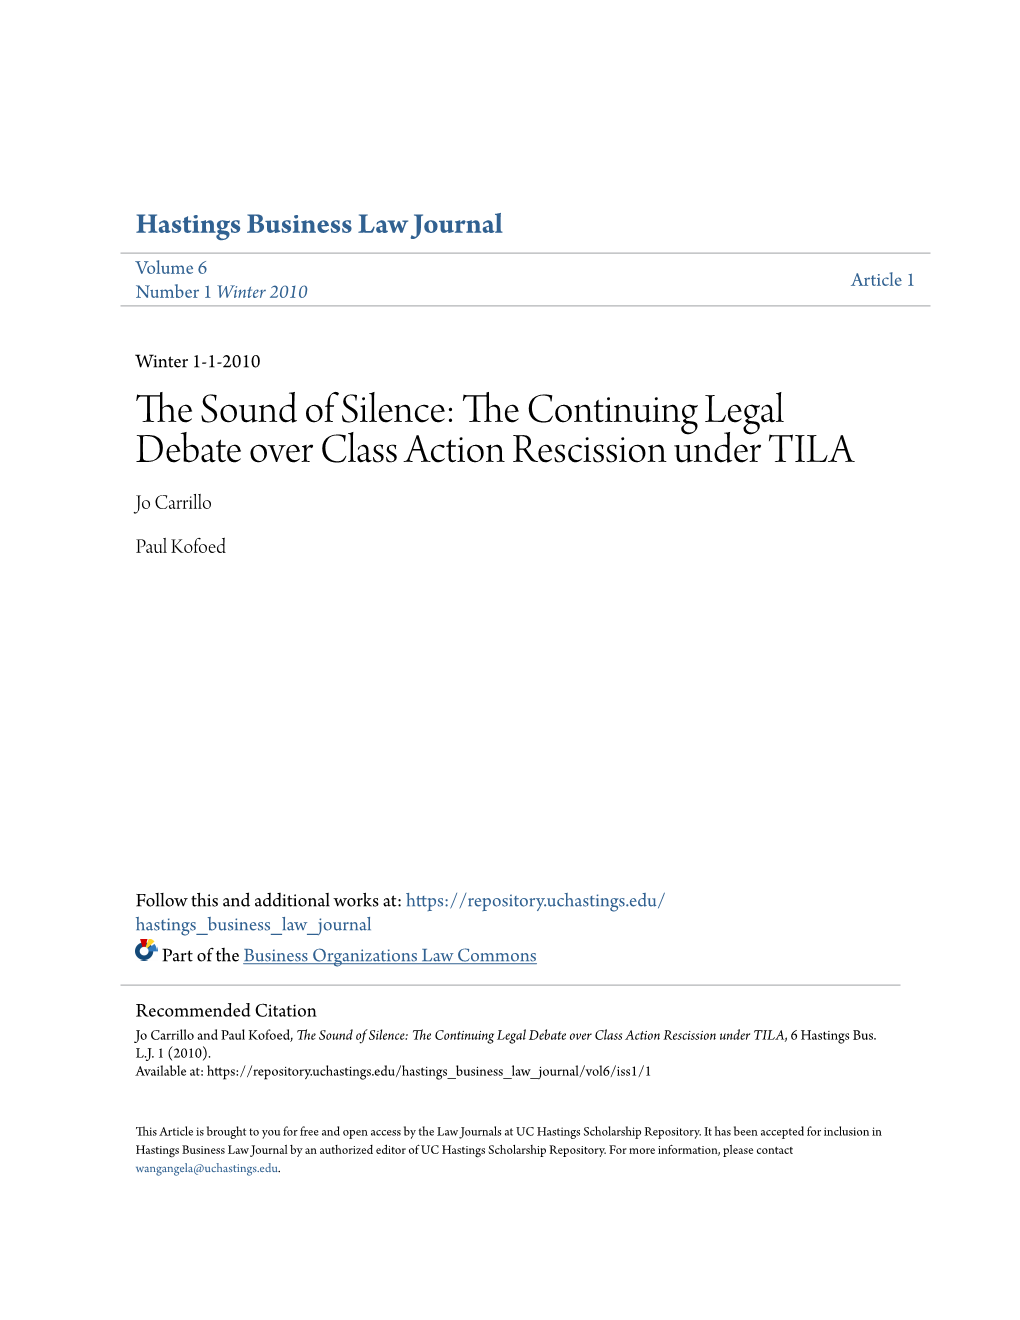 The Continuing Legal Debate Over Class Action Rescission Under TILA, 6 Hastings Bus